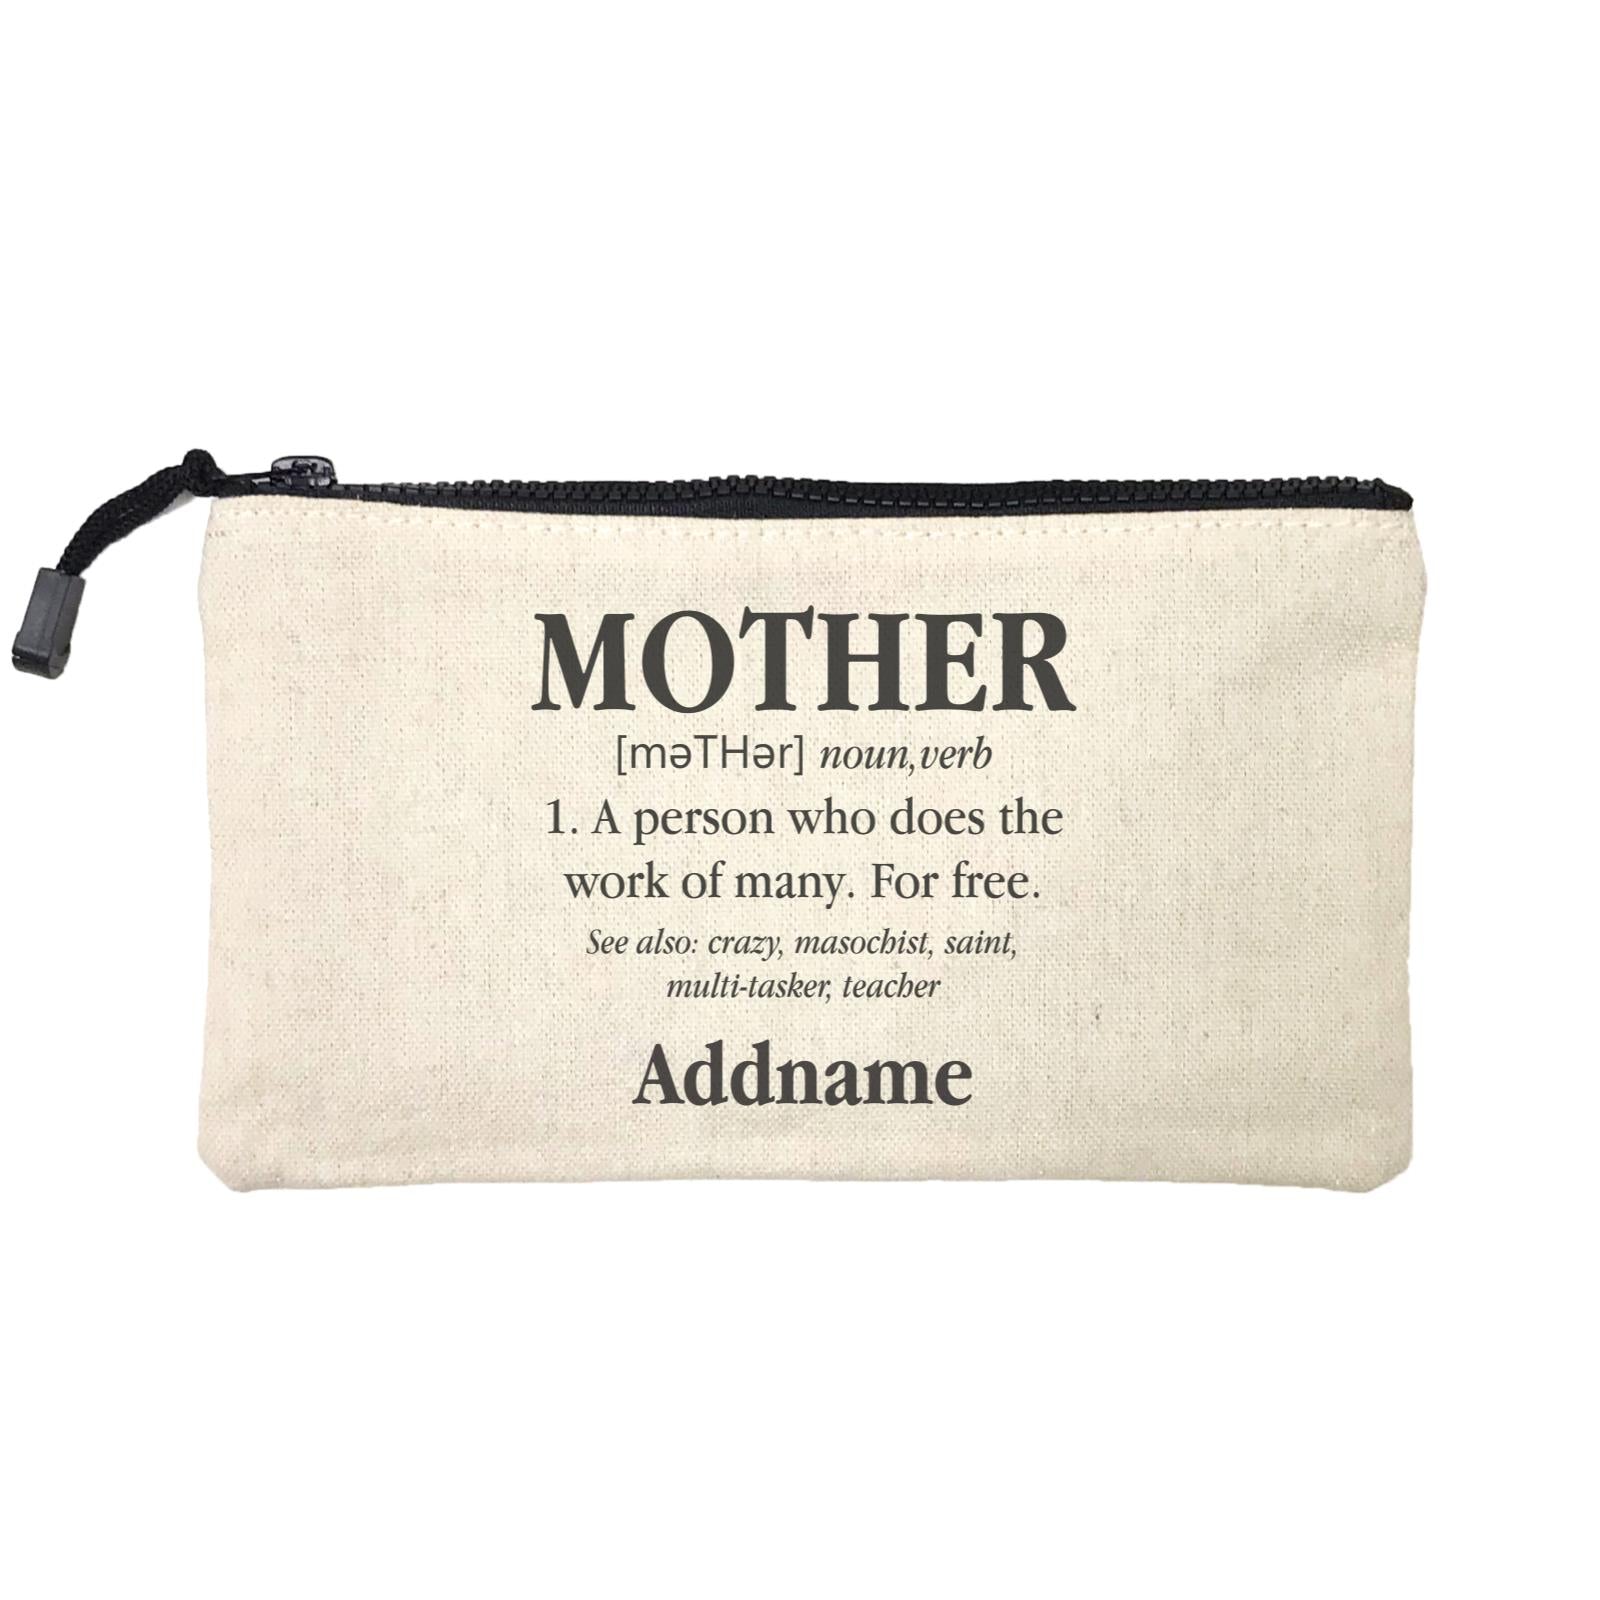 Funny Mom Quotes Mother Meaning A Person Who Does The Work Of Many For Free Addname Mini Accessories Stationery Pouch